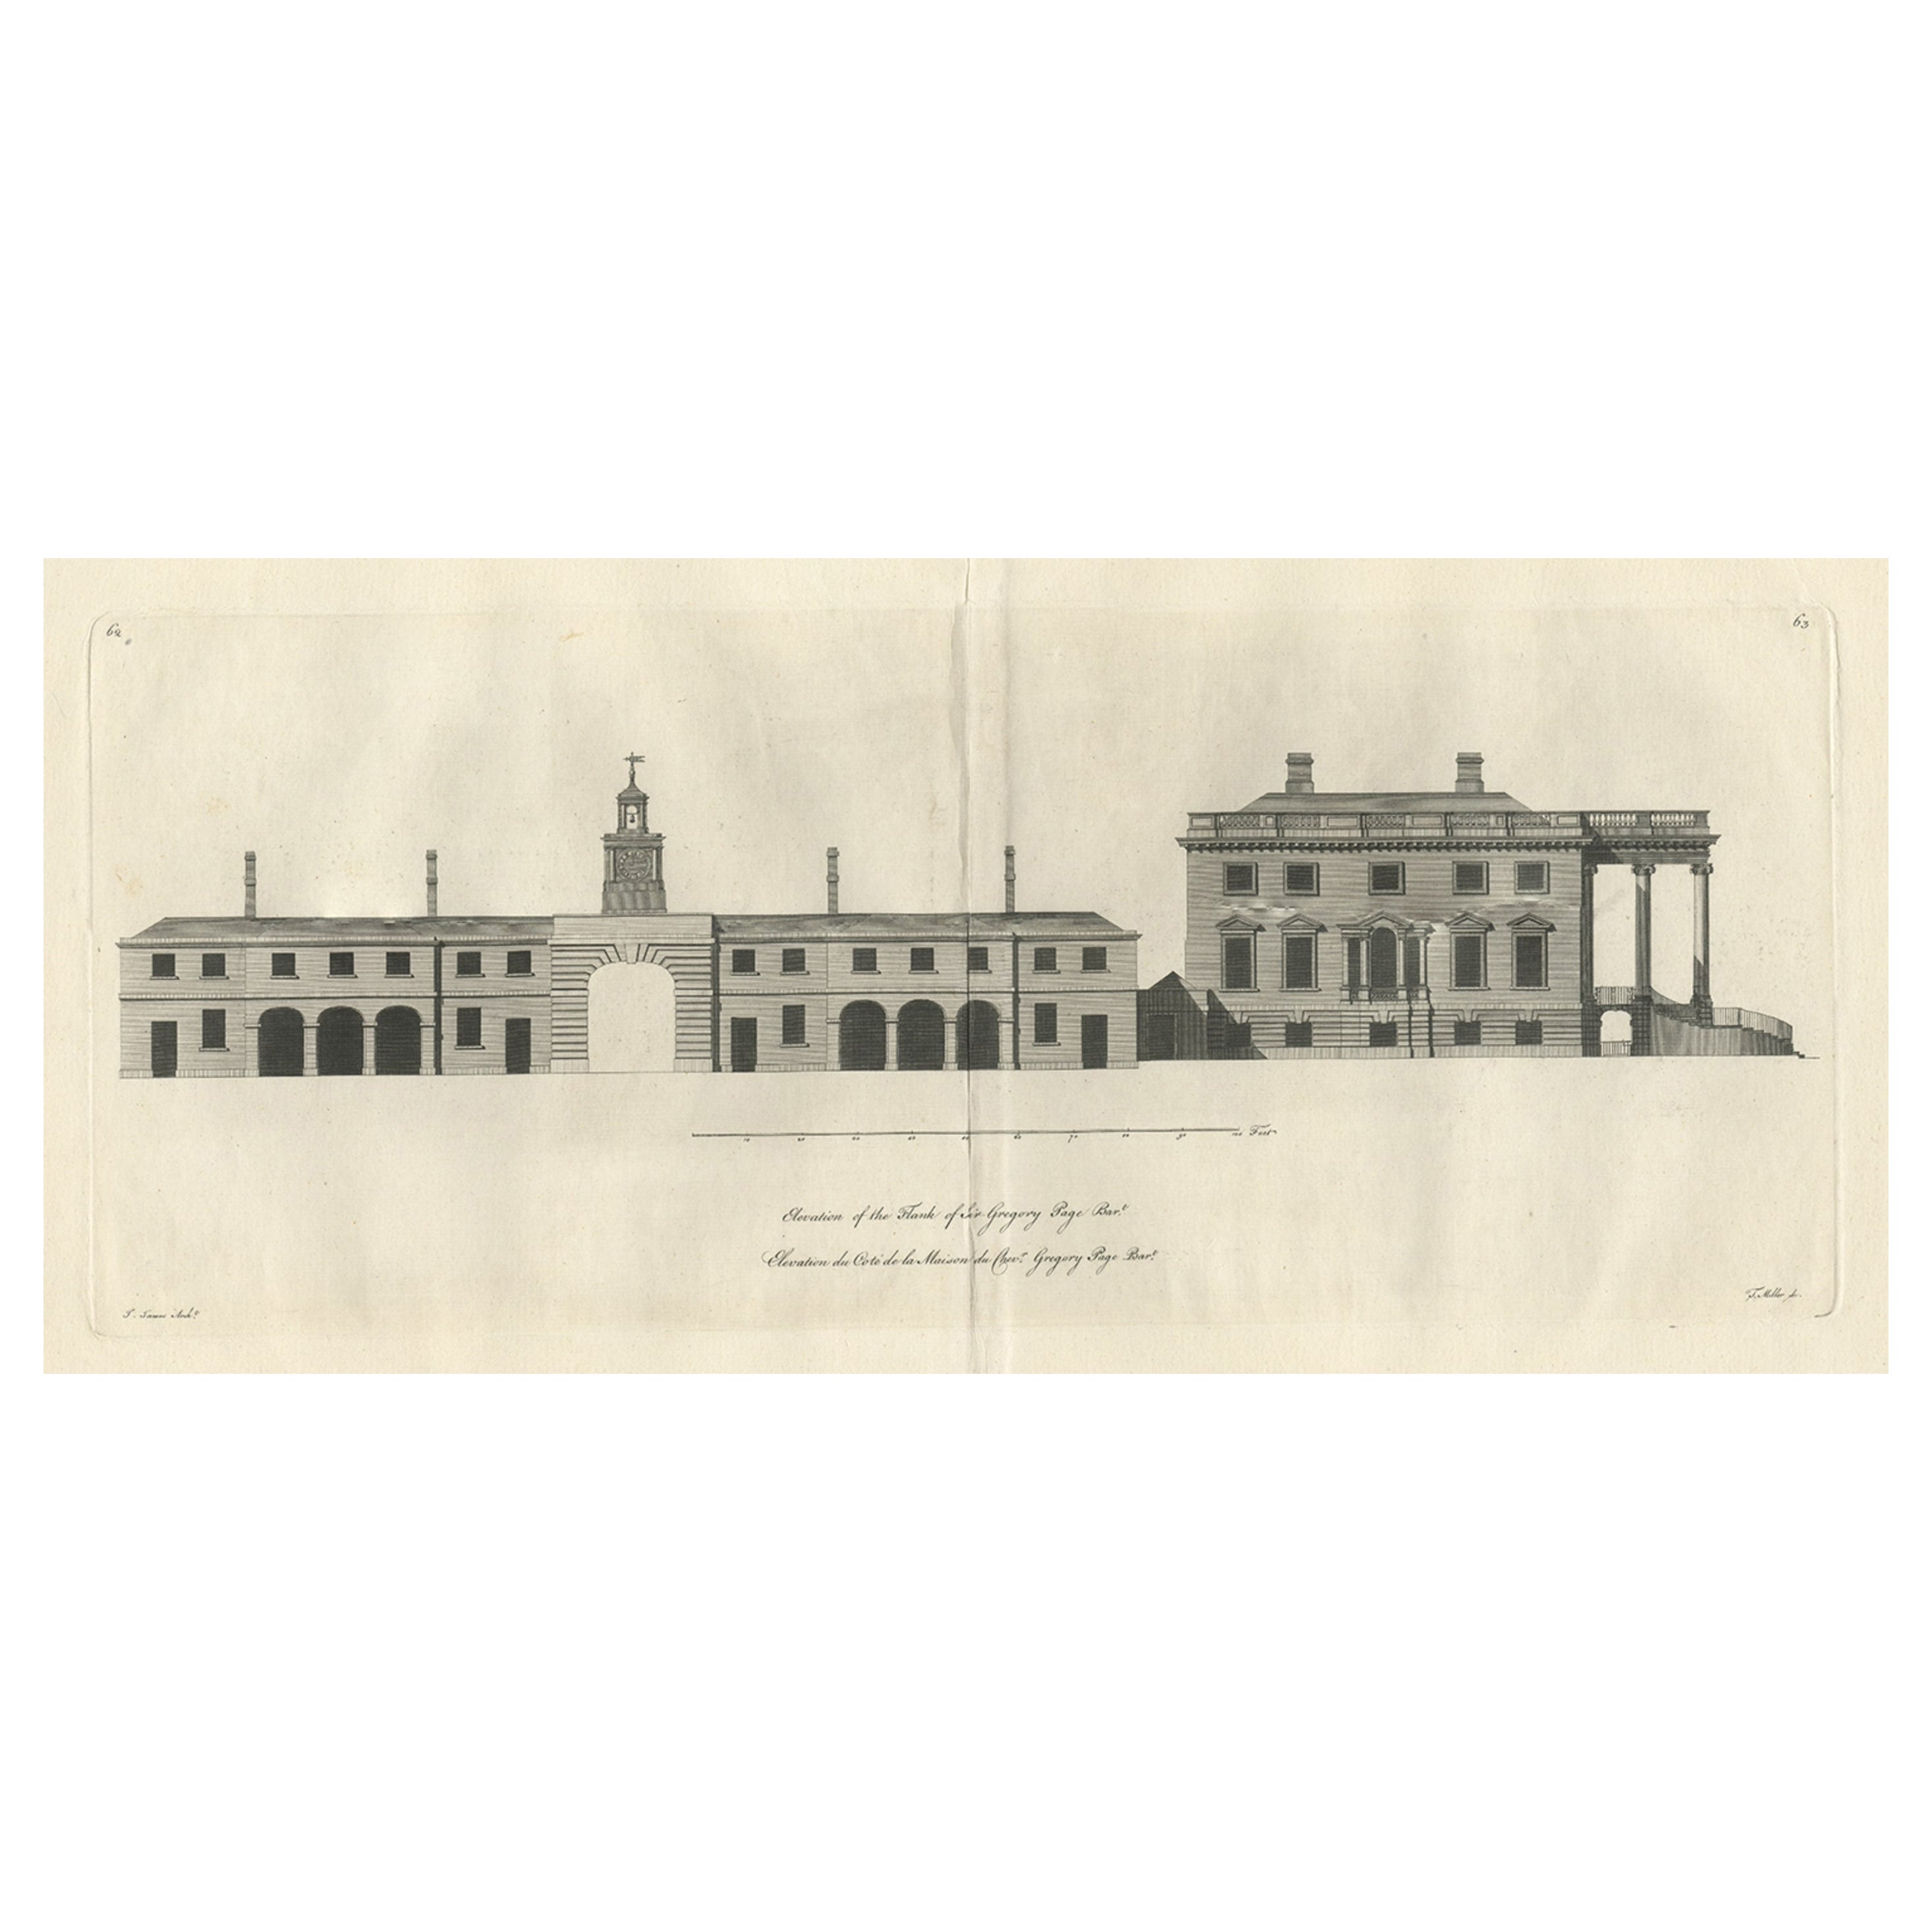 Antique Print of the Residence of Sir Gregory Page by Miller, c.1770